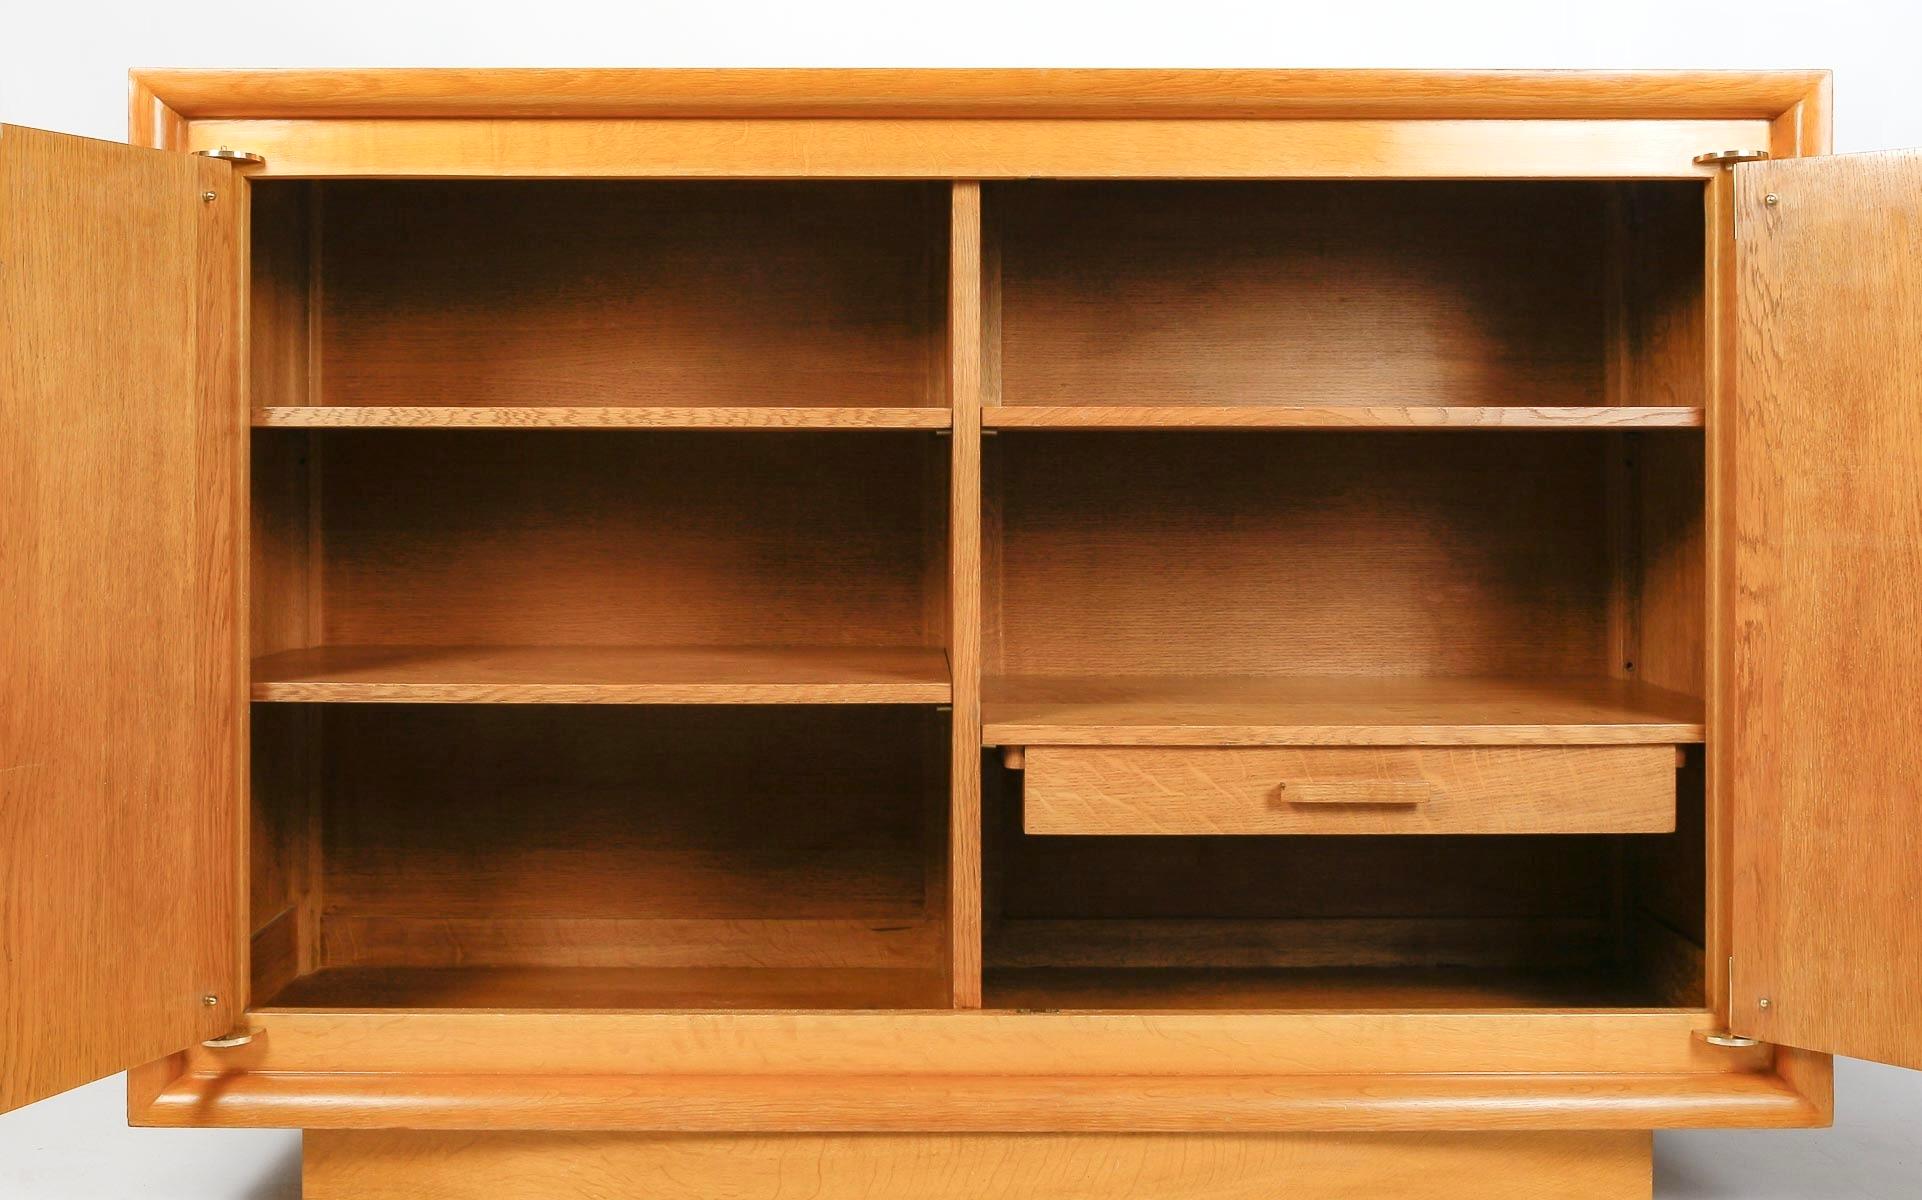 1940 Storage unit by Maxime Old in light oak marquetry. 1